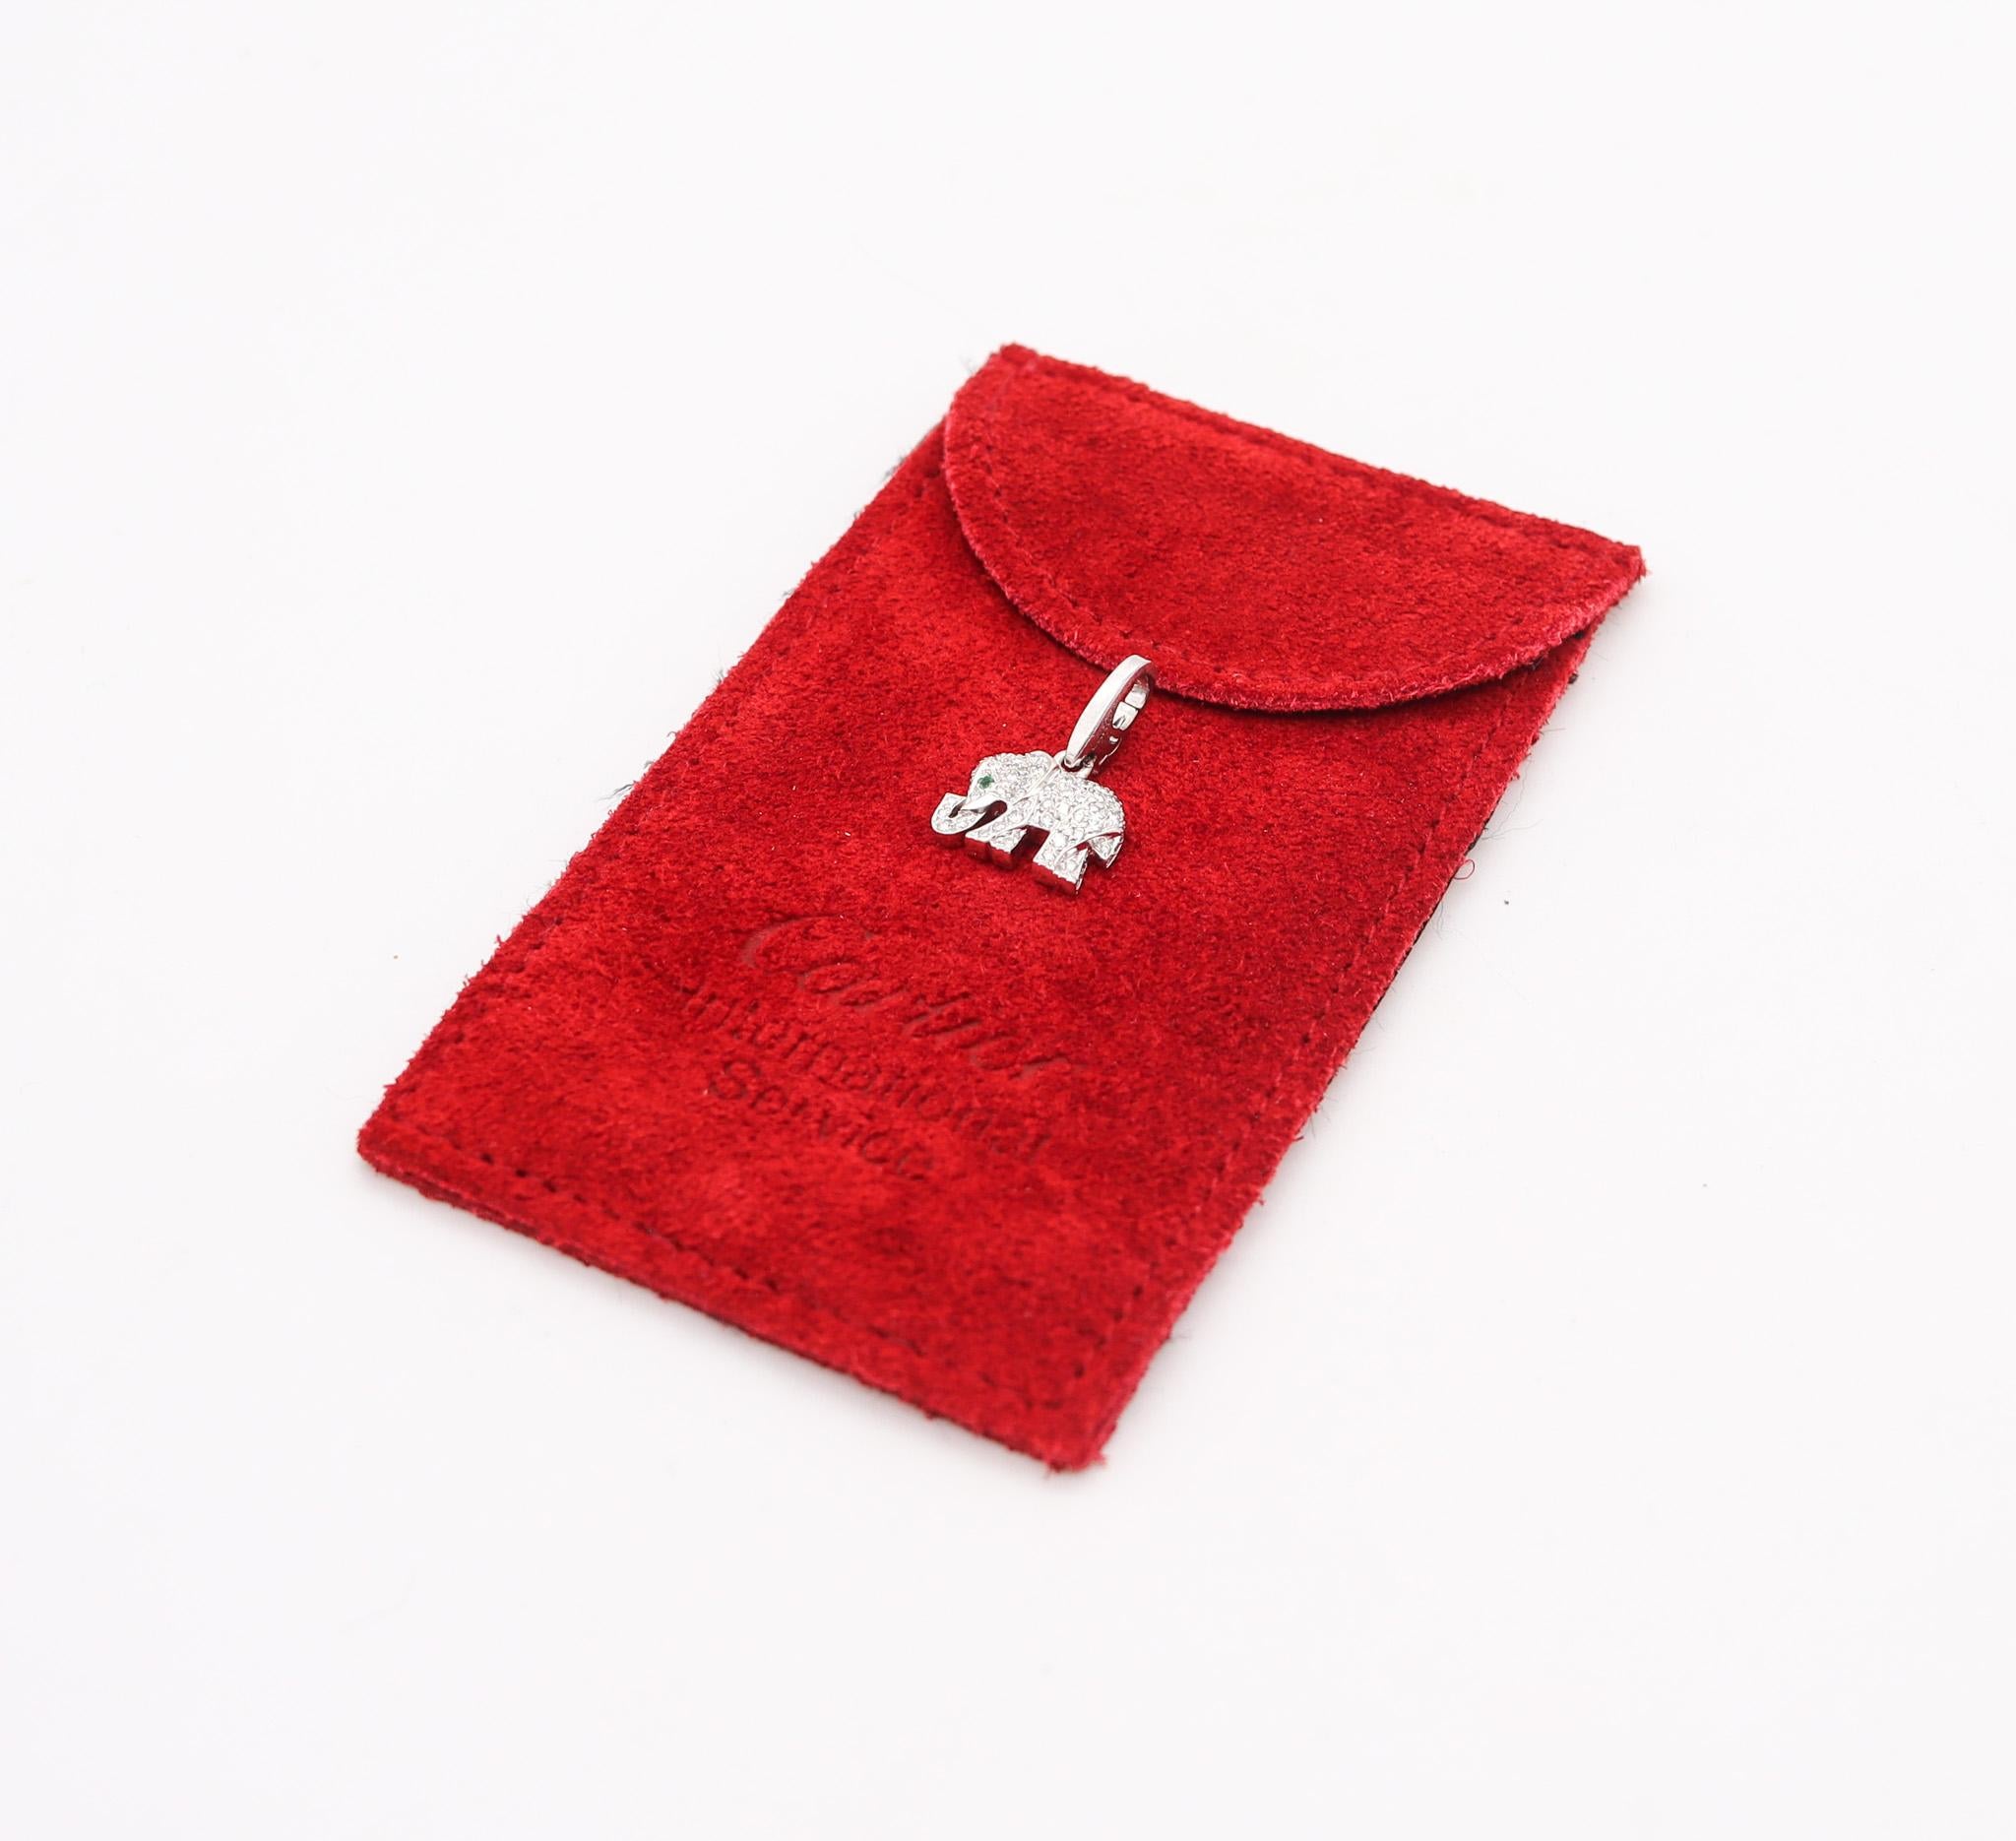 An elephant charm designed by Cartier.

An iconic charm in the shape of a Khandy elephant, created in Paris by the French luxury jewelry house of Cartier. This beautiful useful pendant-charm has been crafted in solid white gold of 18 karats and